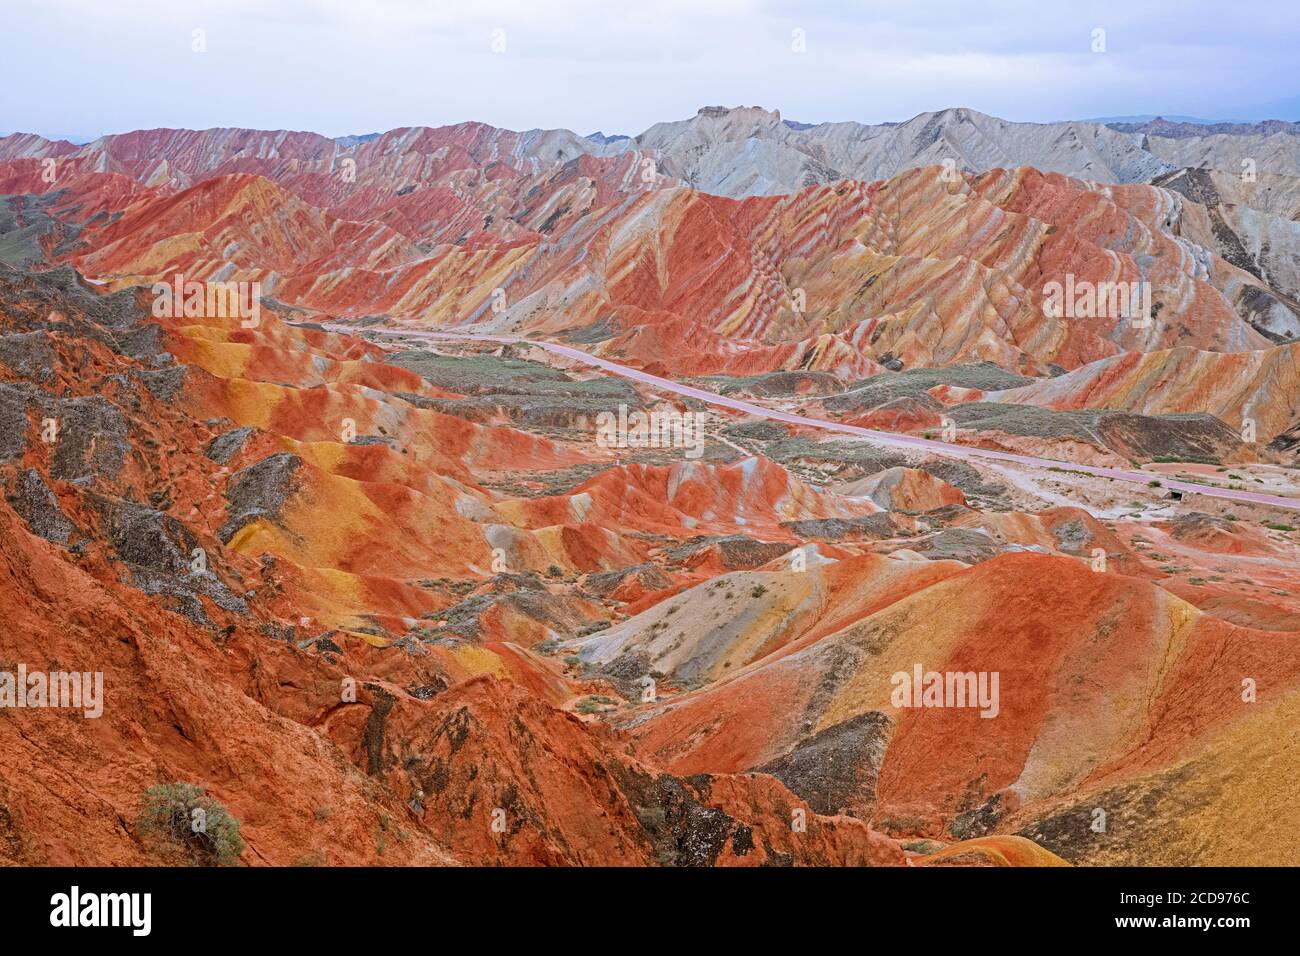 Colourful badlands in the Zhangye National Geopark / Zhangye Danxia Geopark in the northern foothills of the Qilian Mountains, Gansu Province, China Stock Photo